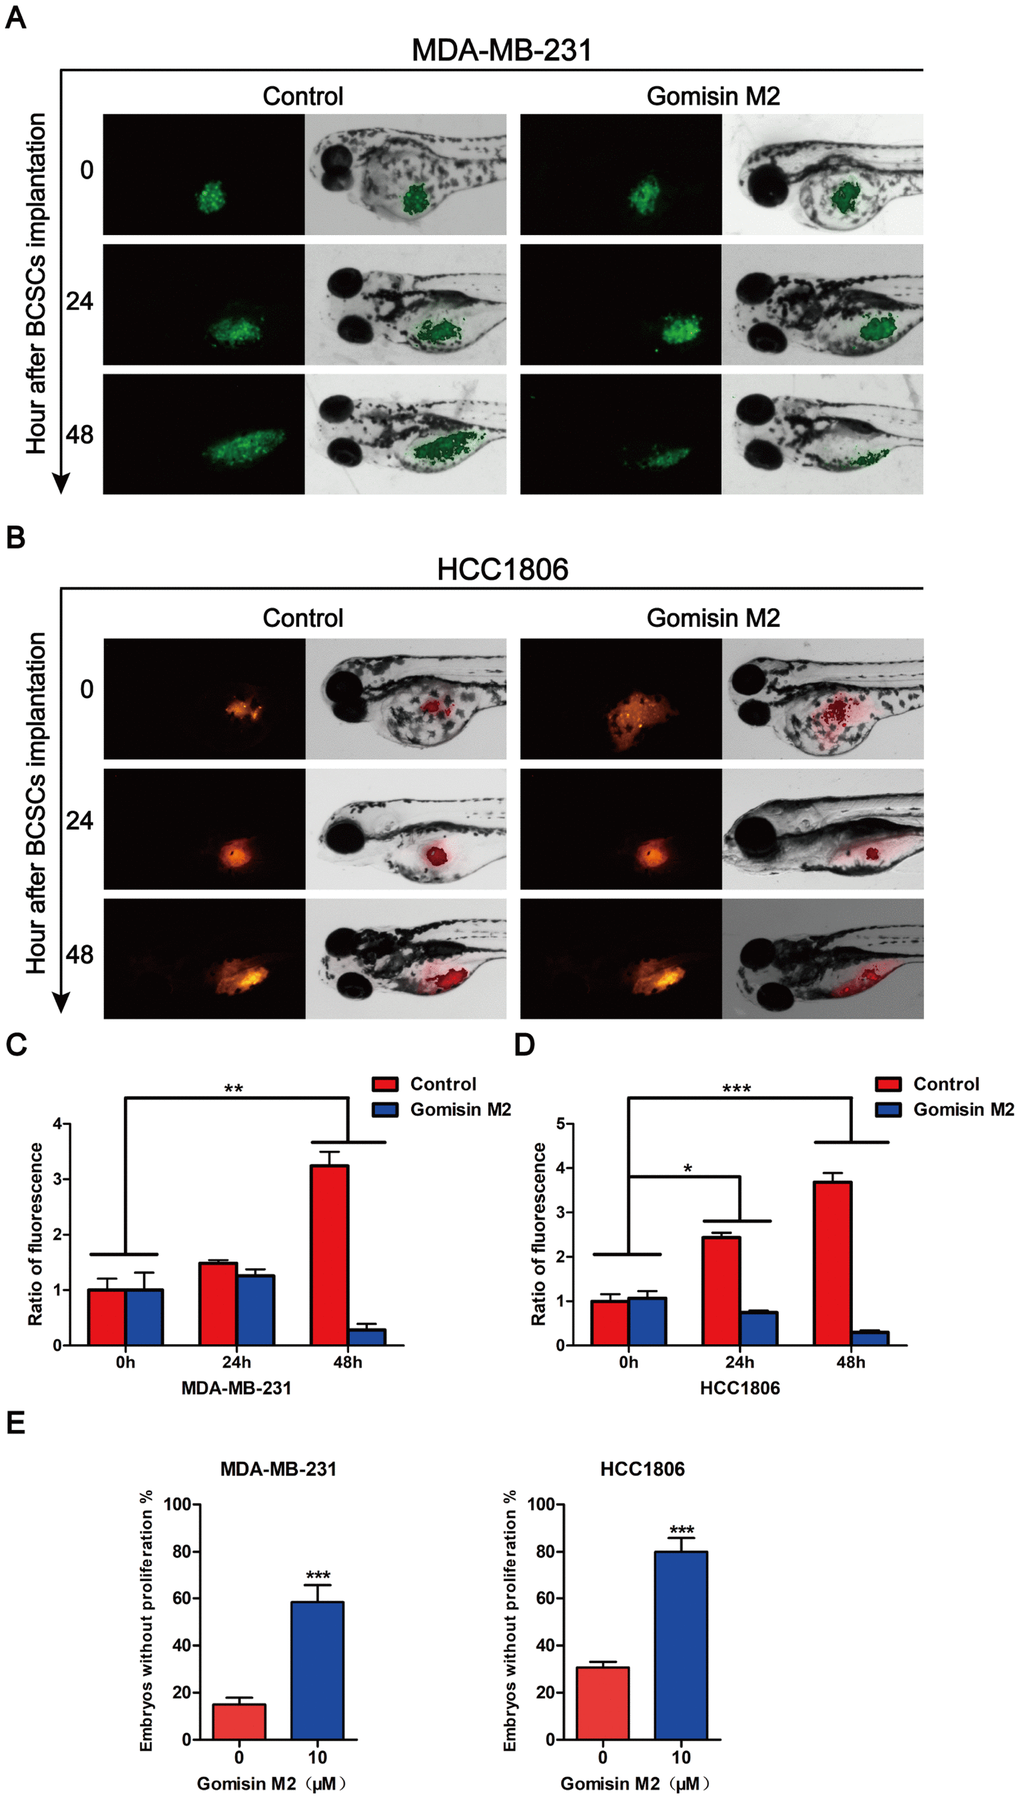 Gomisin M2 inhibits tumor growth in zebrafish. Cancer stem cells enriched MDA-MB-231-GFP (green) (A) or HCC1806 (red) (B) cells were microinjected into zebrafish embryos (larvae stage, n = 30 per group). Fluorescence density was captured by fluorescence microscopy at 0, 24 and 48 h after implantation. (C) The quantitative data of panel A in green fluorescence intensity. (D) The quantitative data of panel B in red fluorescence intensity. *p E) Statistical analysis of panel A and B the percentages of embryos without proliferation in control and Gomisin M2 groups in 48 h.